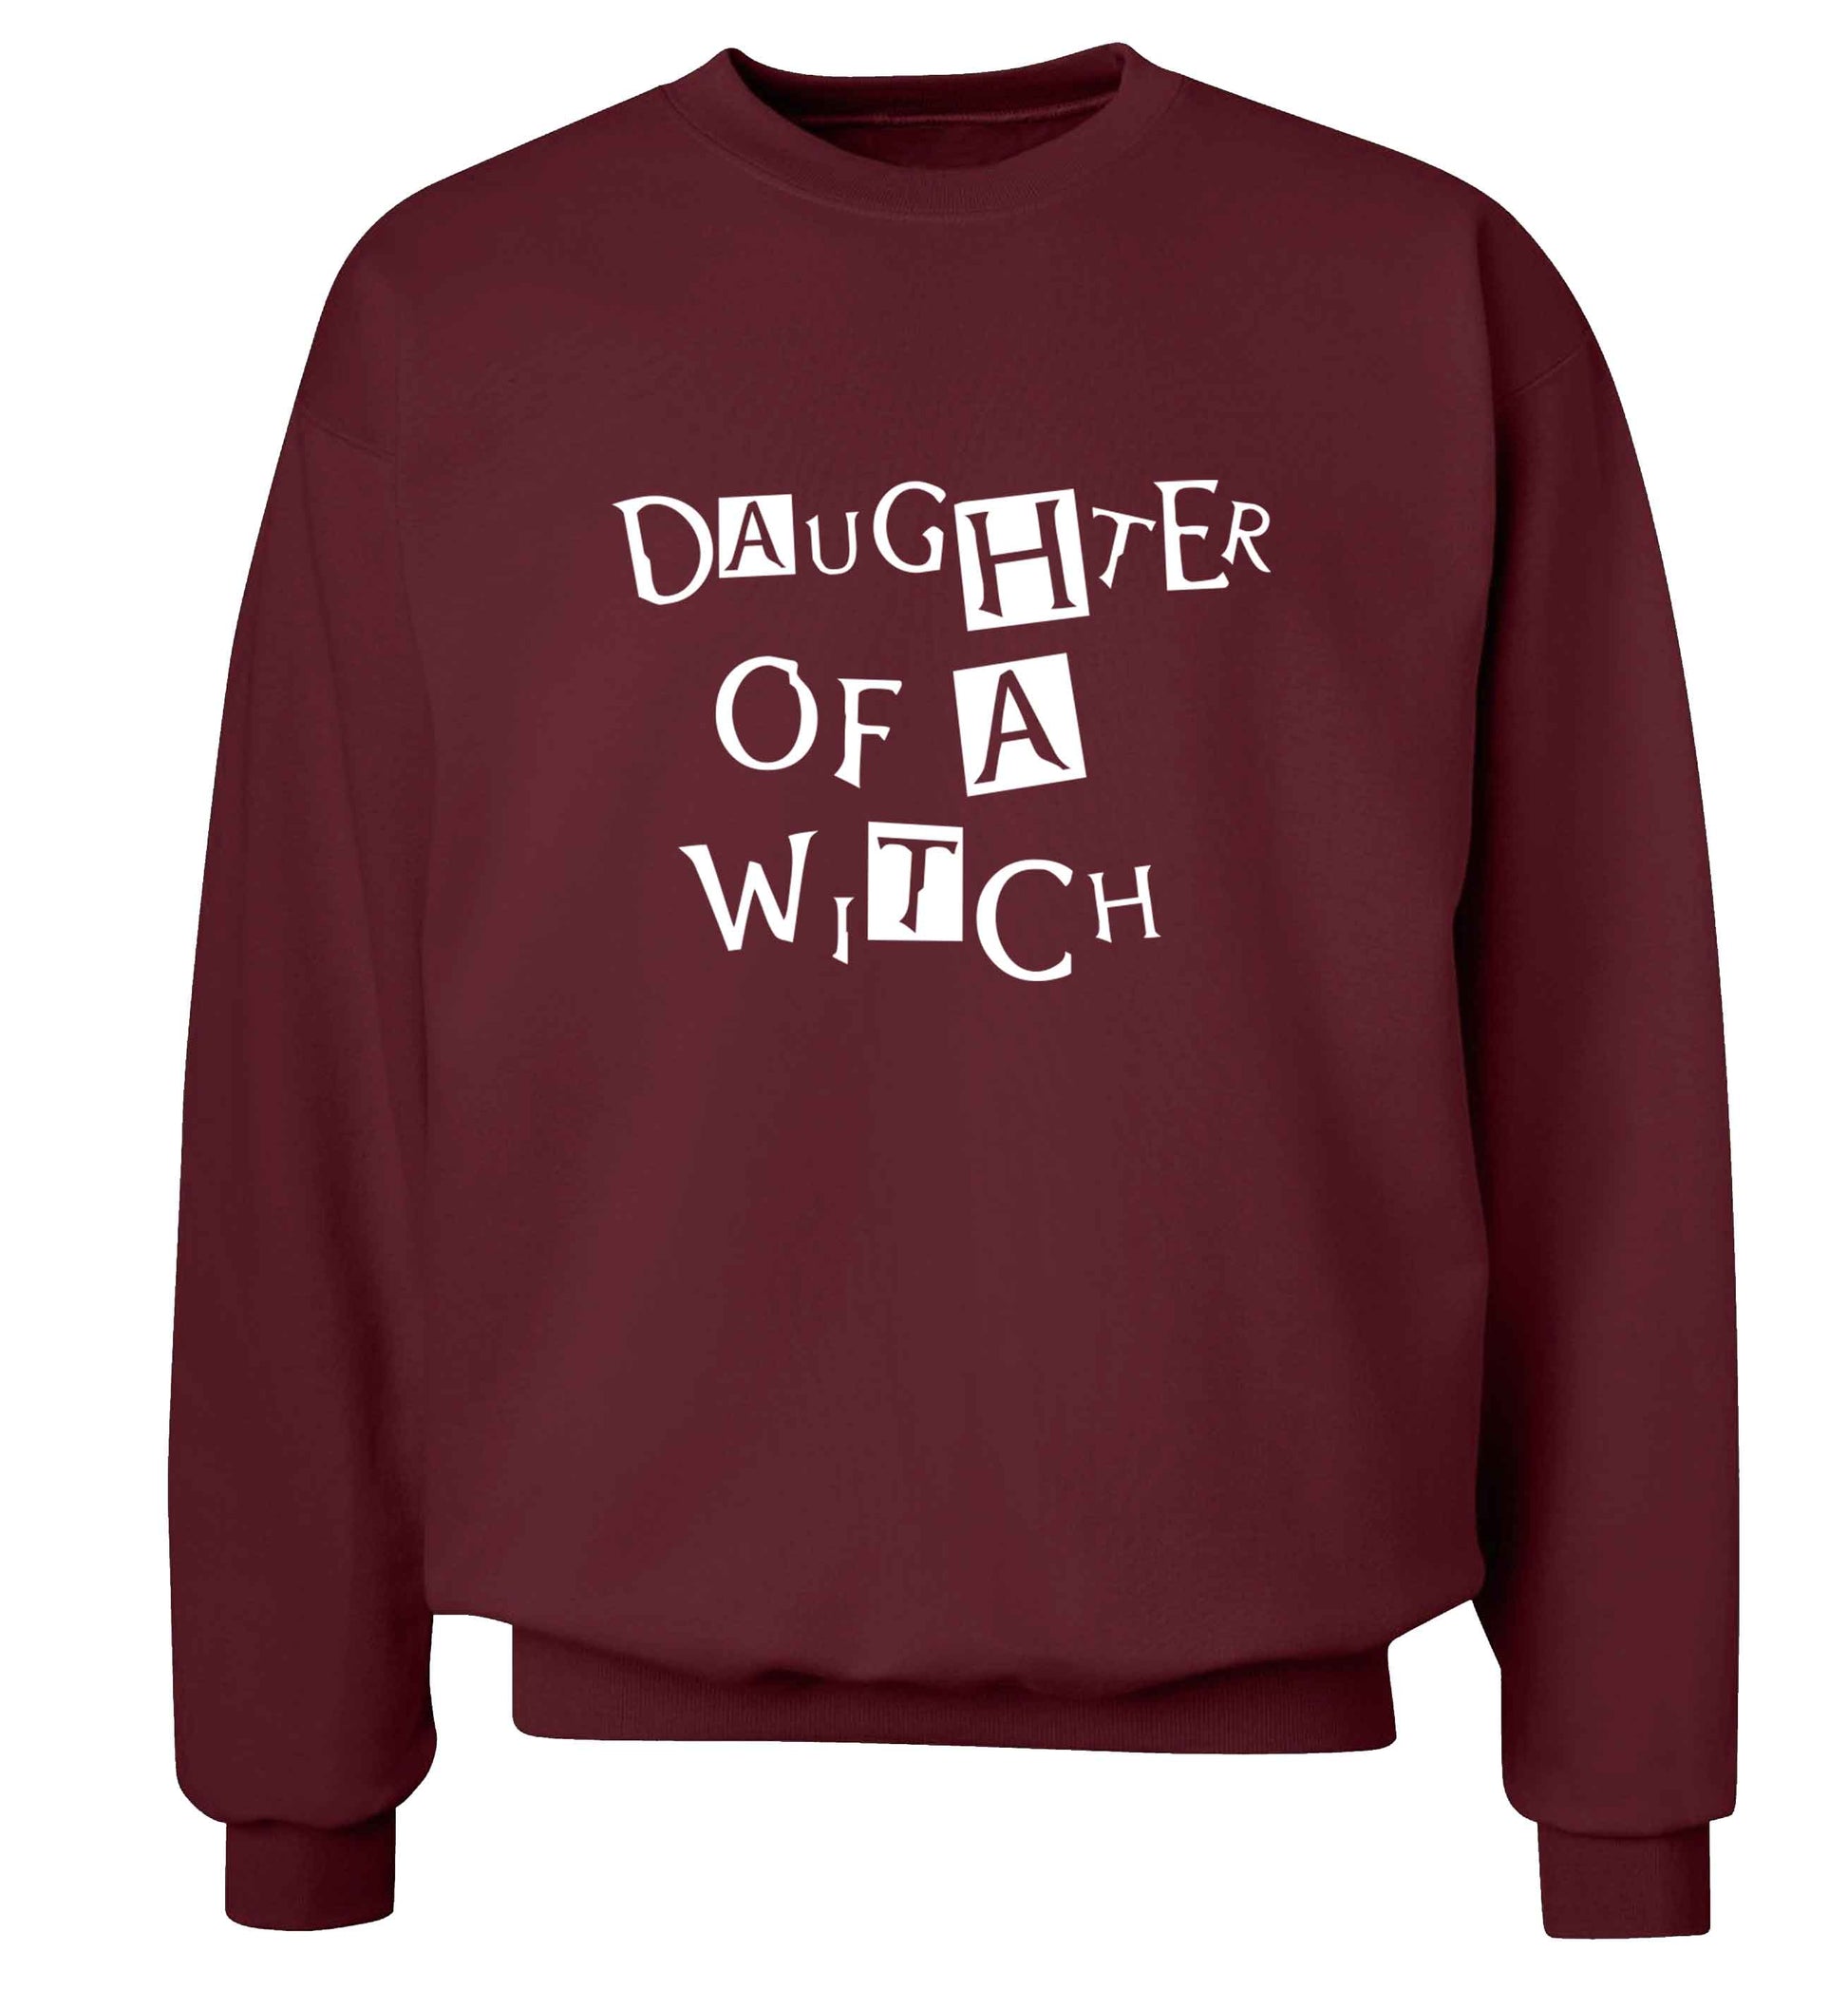 Daughter of a witch adult's unisex maroon sweater 2XL